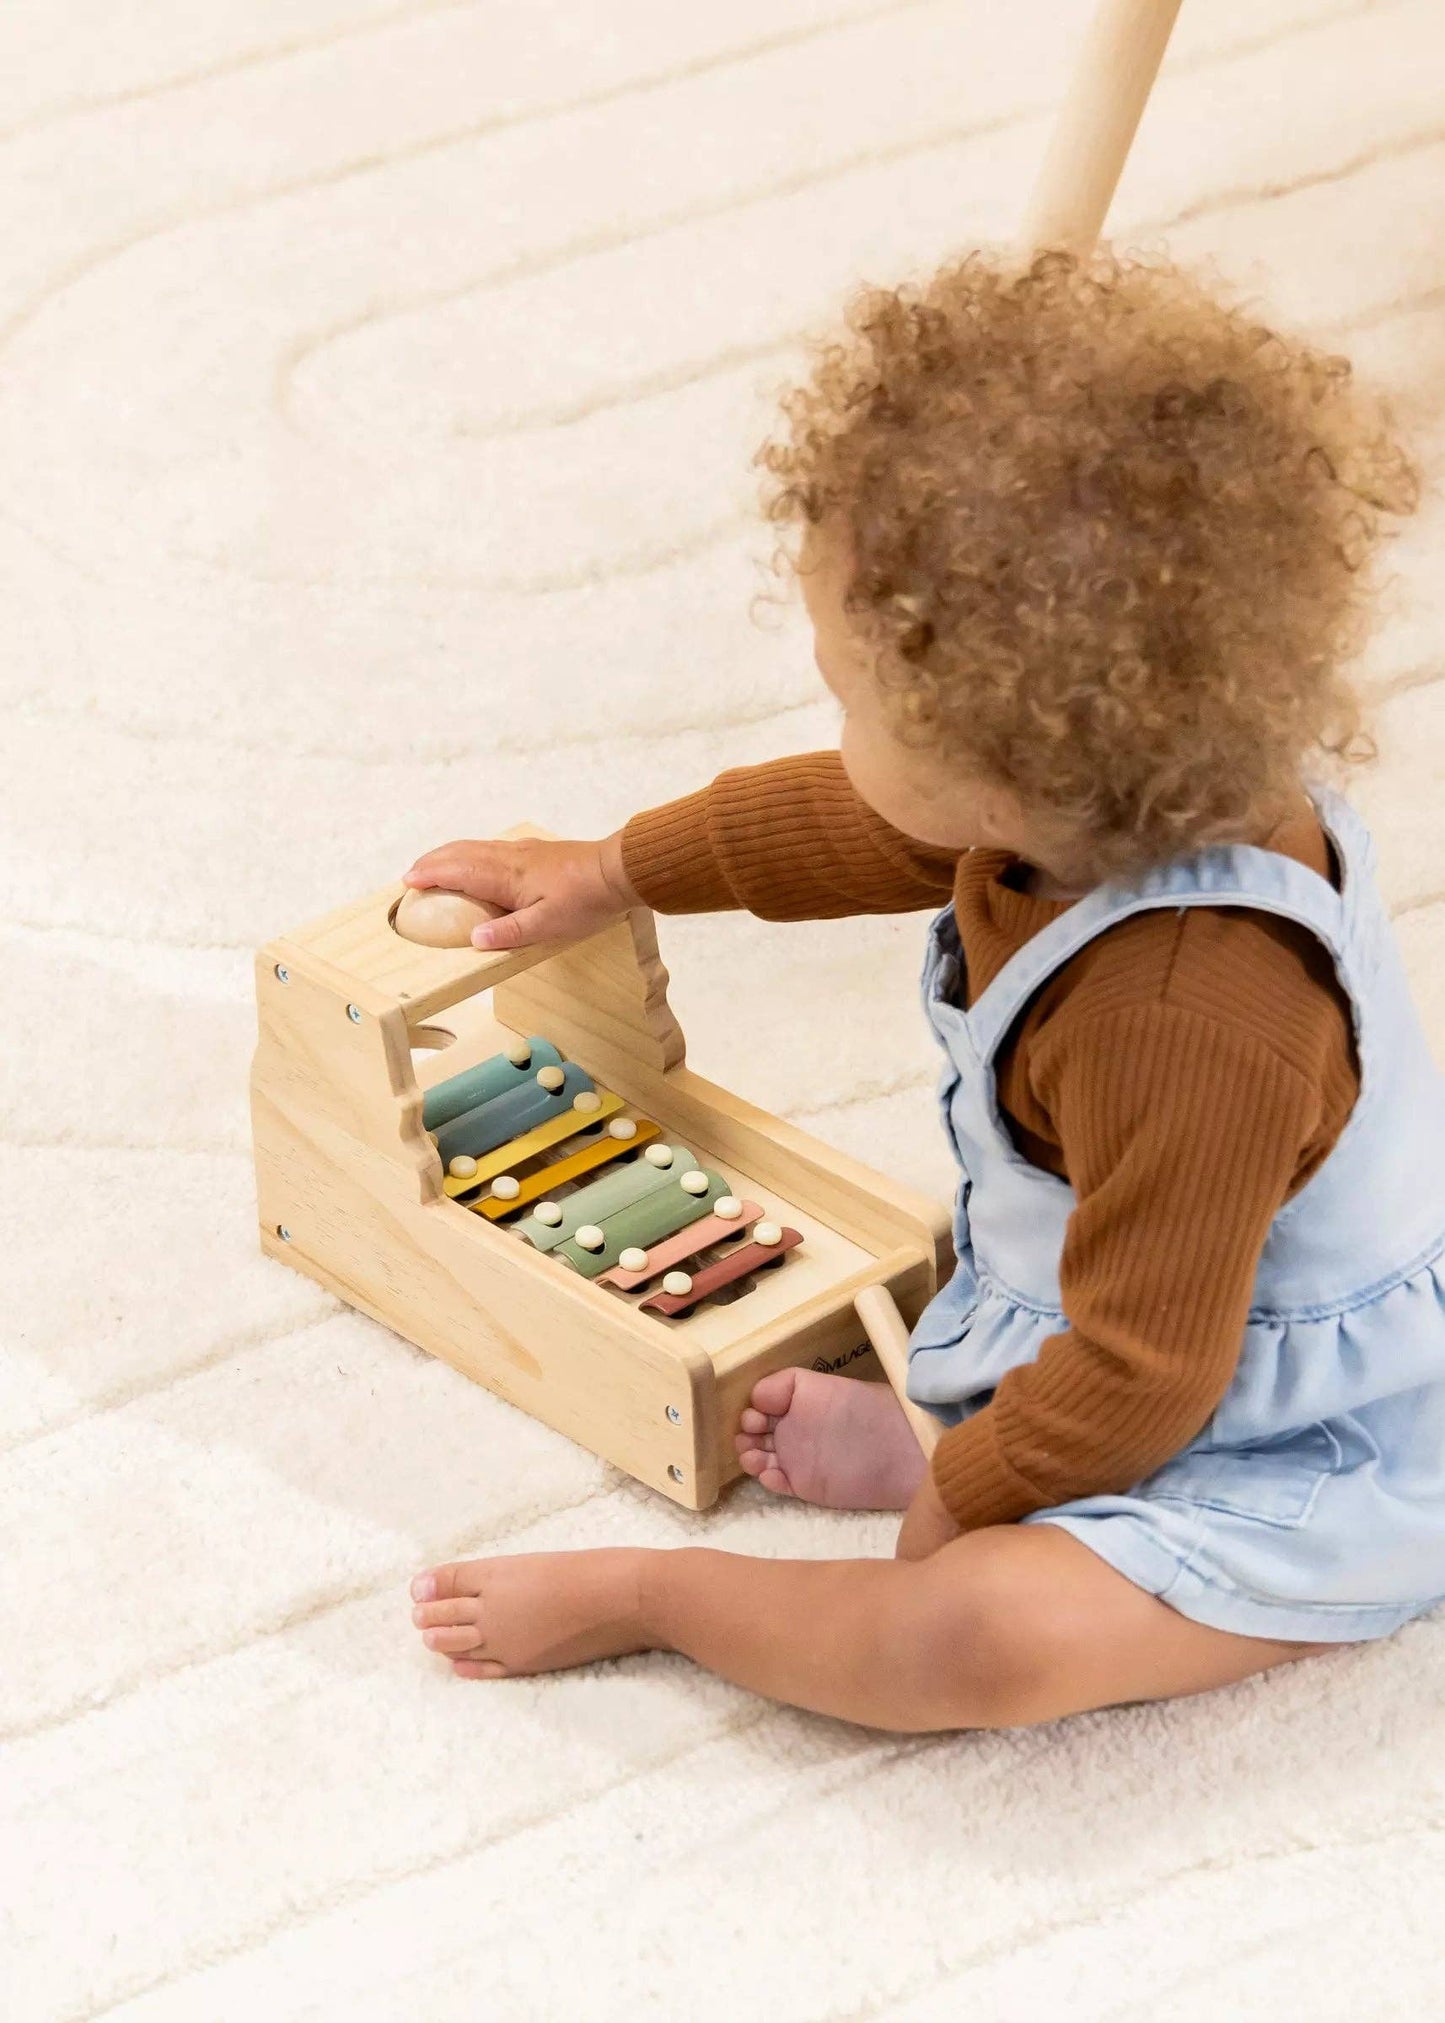 Wooden Xylophone and Knocking Toy